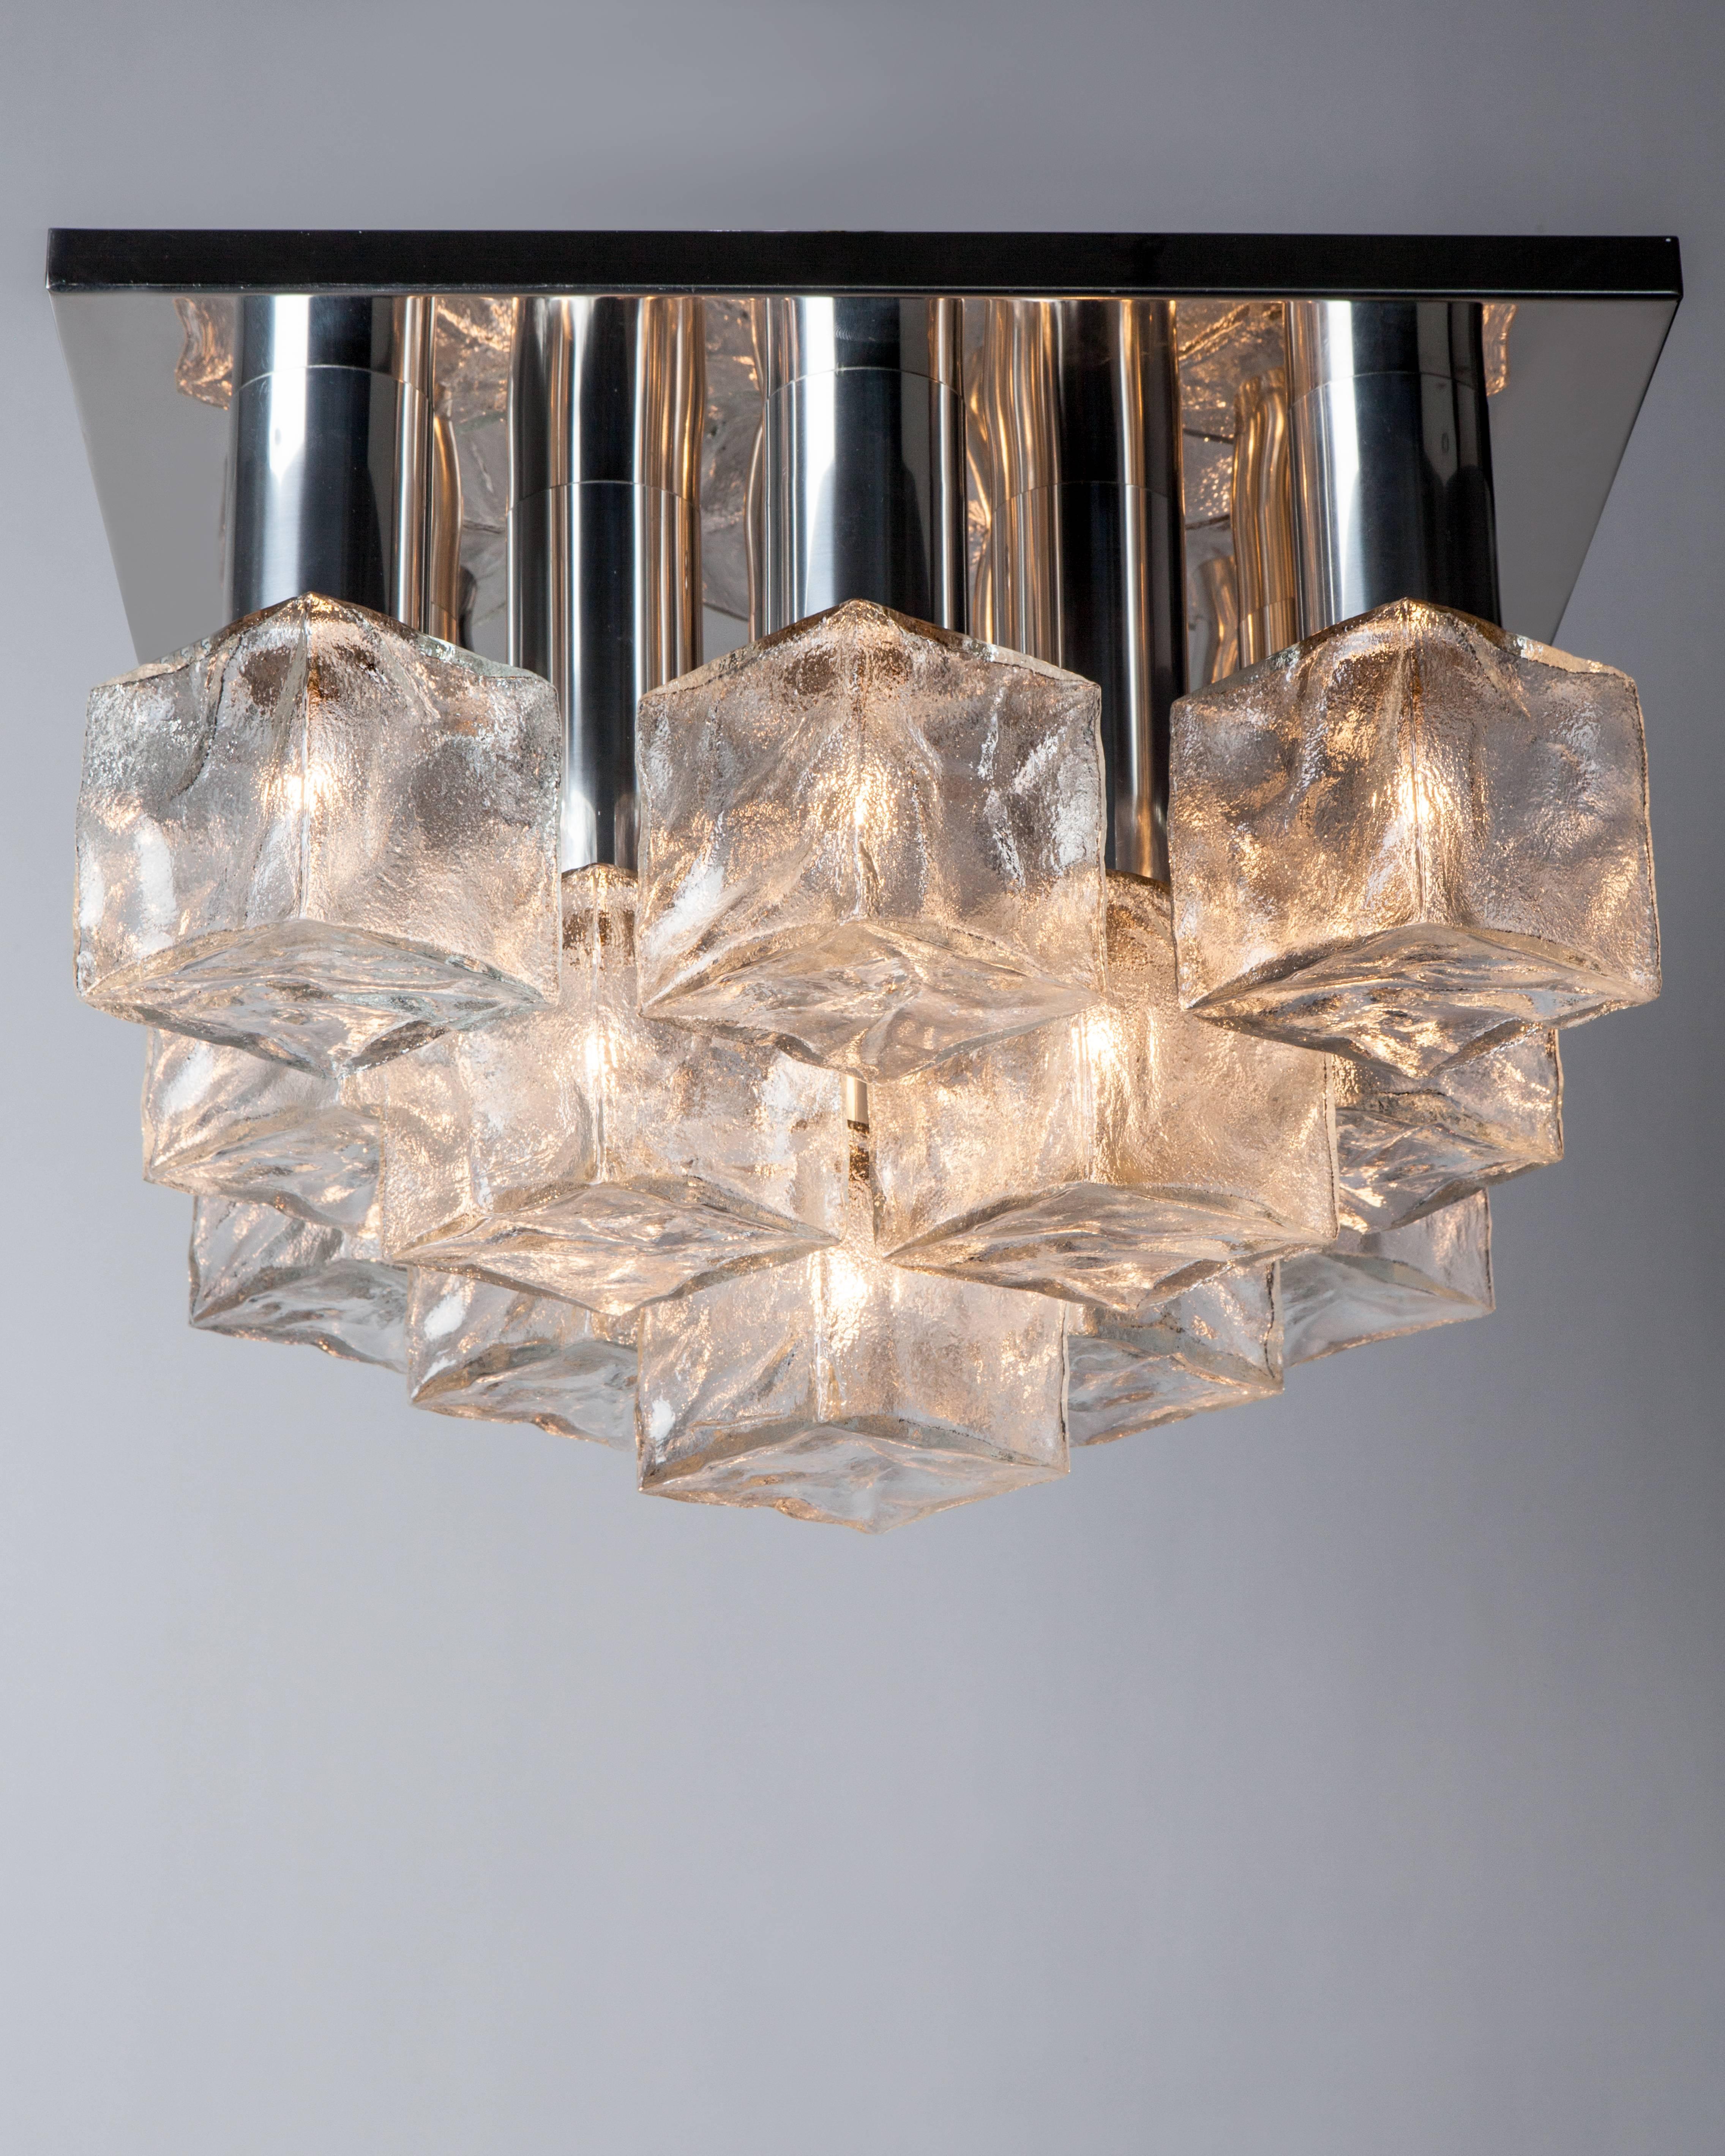 AHL4004.
A vintage flush mount with heavily textured clear cast glass cubes in its original chrome finish. Signed by the Austrian maker Kalmar. Due to the antique nature of this fixture, there may be some nicks or imperfections in the